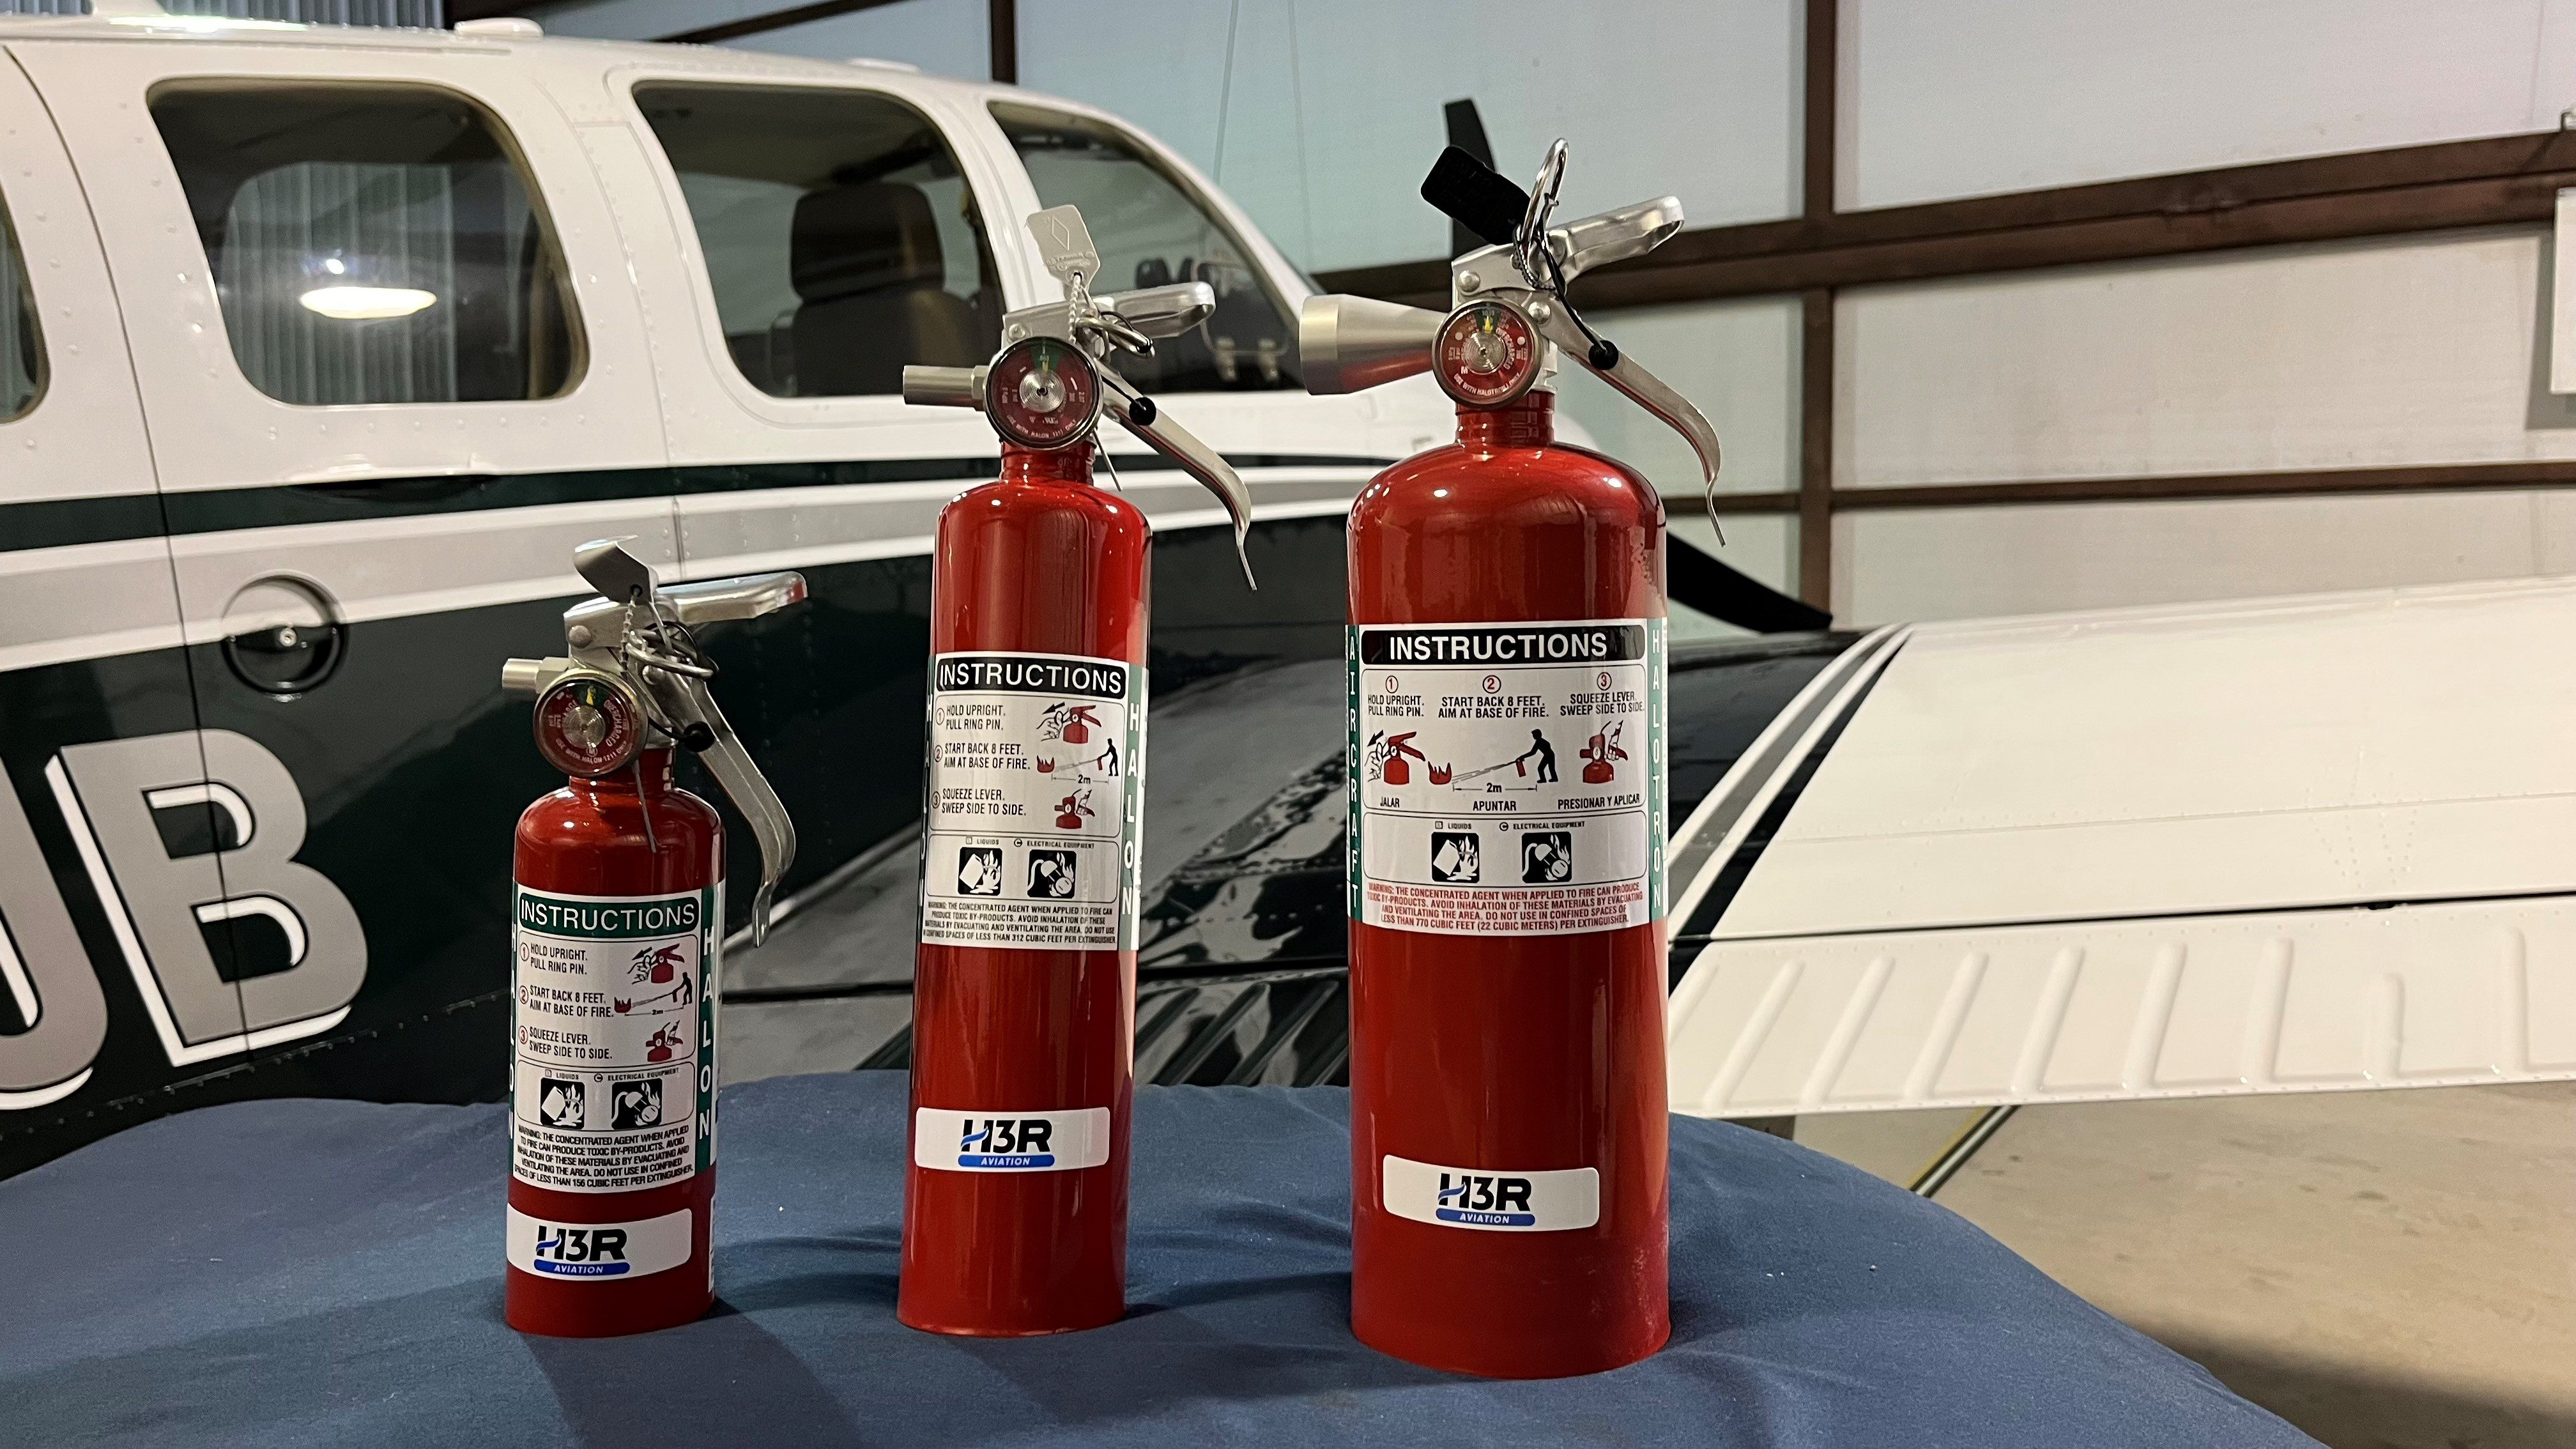 Halon extinguishers come in a variety of sizes for different applications. Photo courtesy of Jeff Simon.